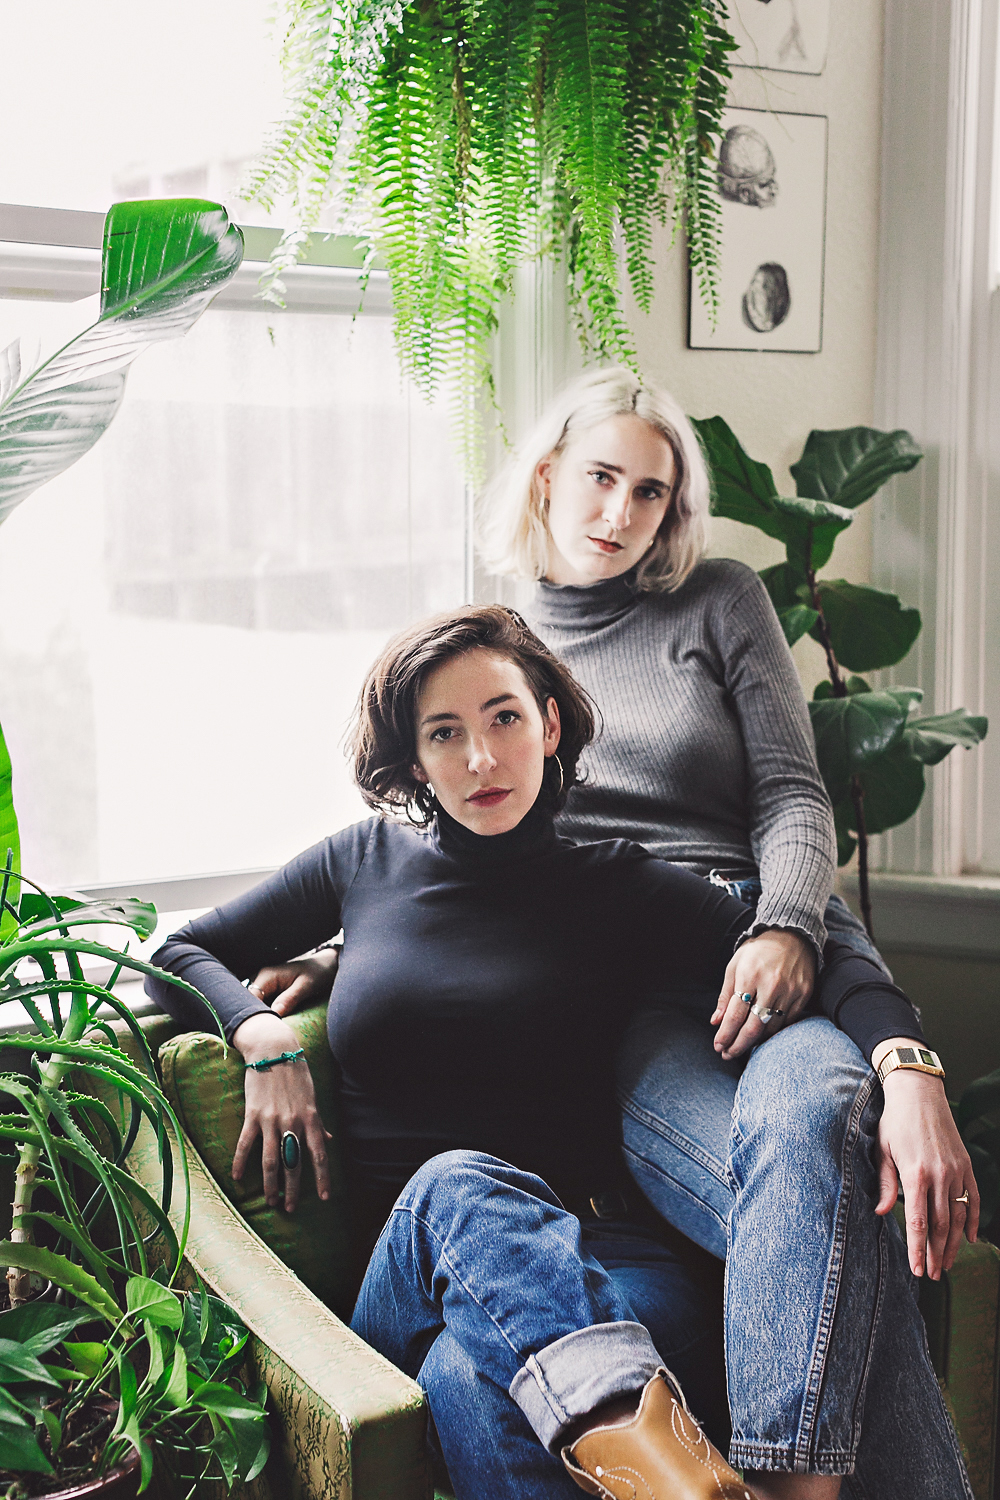 Meet Cyo and Rachel, the leading labium behind Quim Rock, a San Francisco based, Cannabis-infused intimate self-care line.